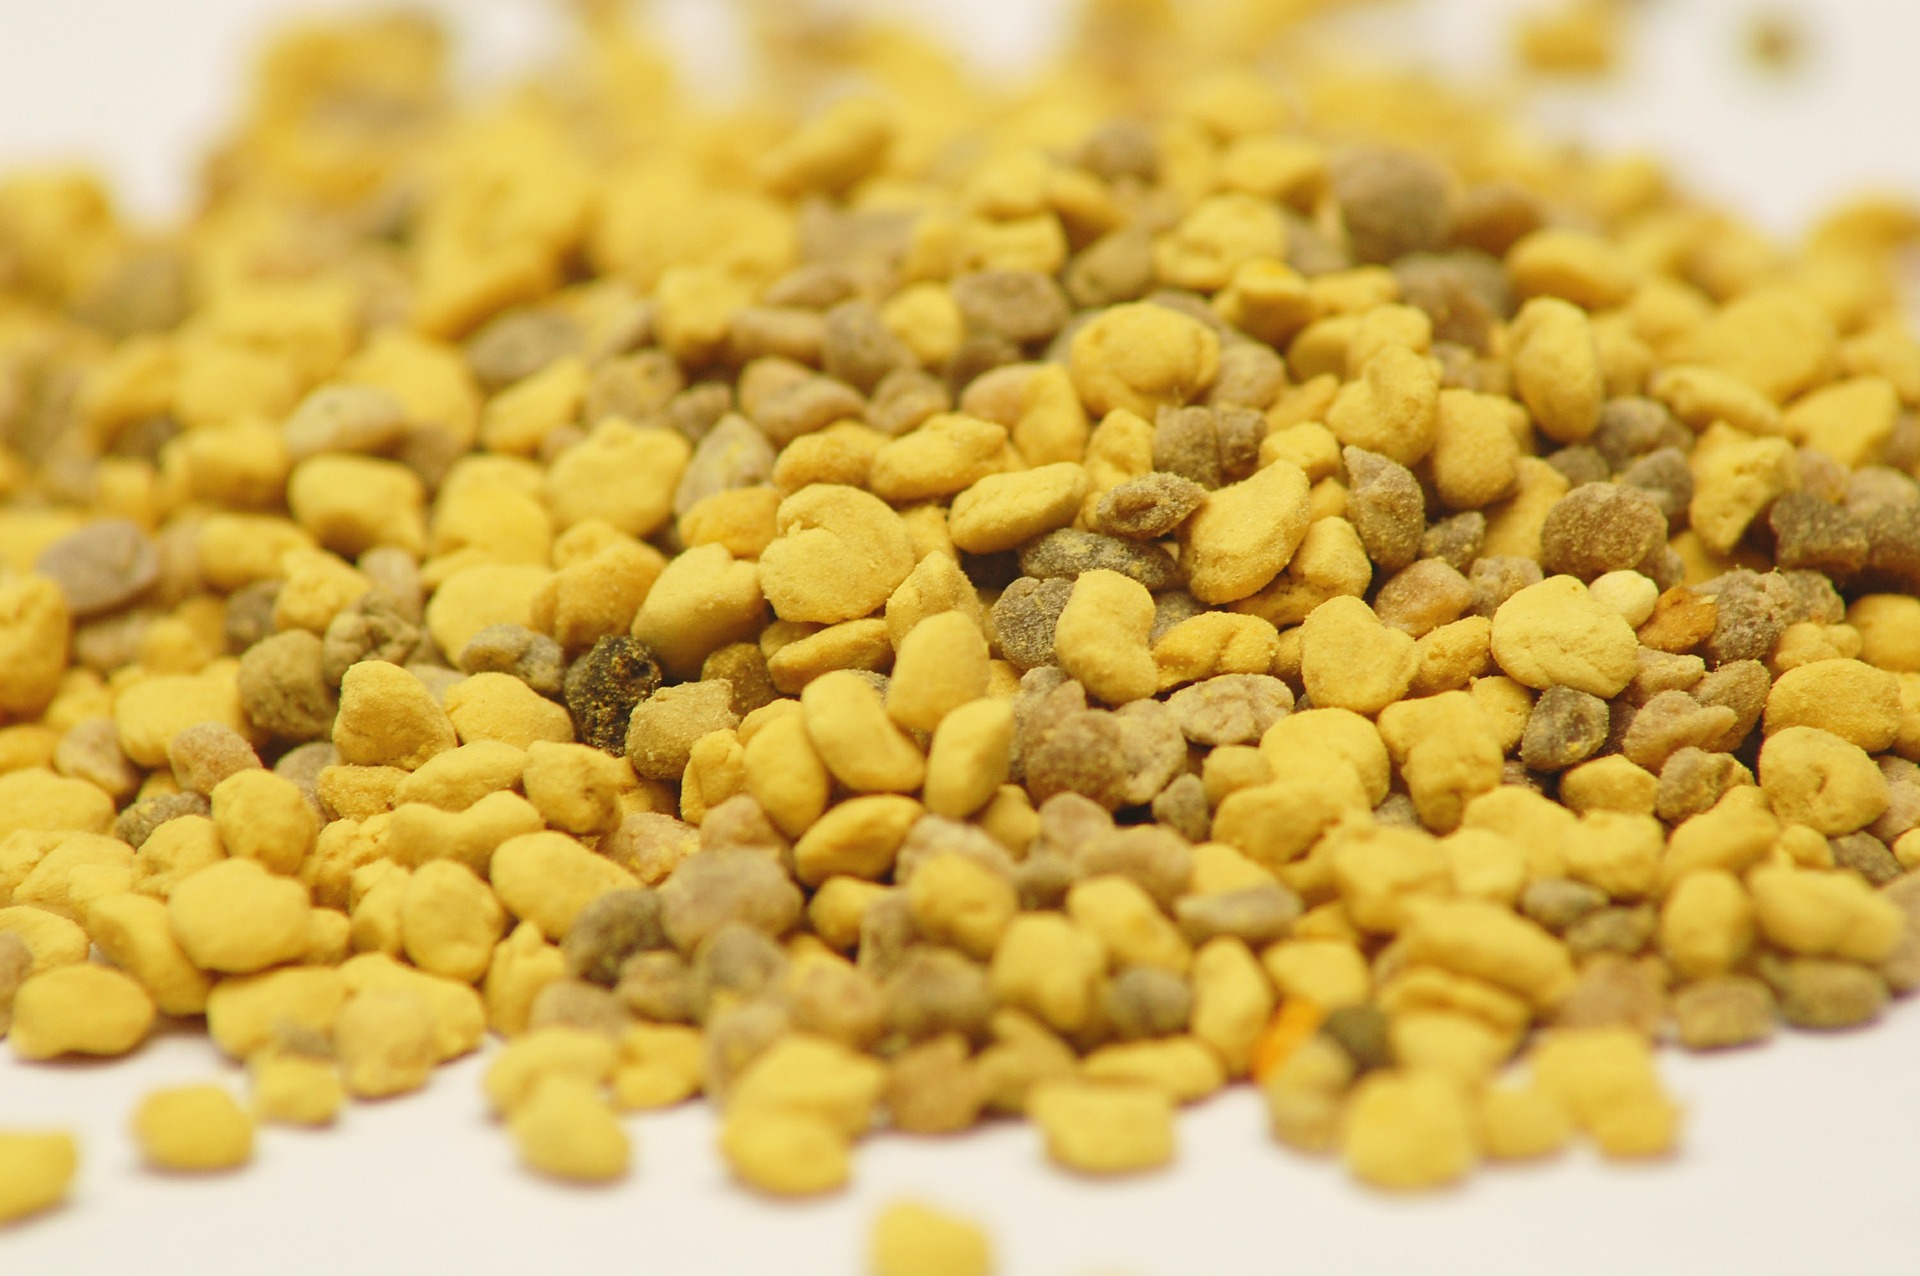 10 Ways Health Improved By Eating 1 Spoon of Bee Pollen - Pahrump